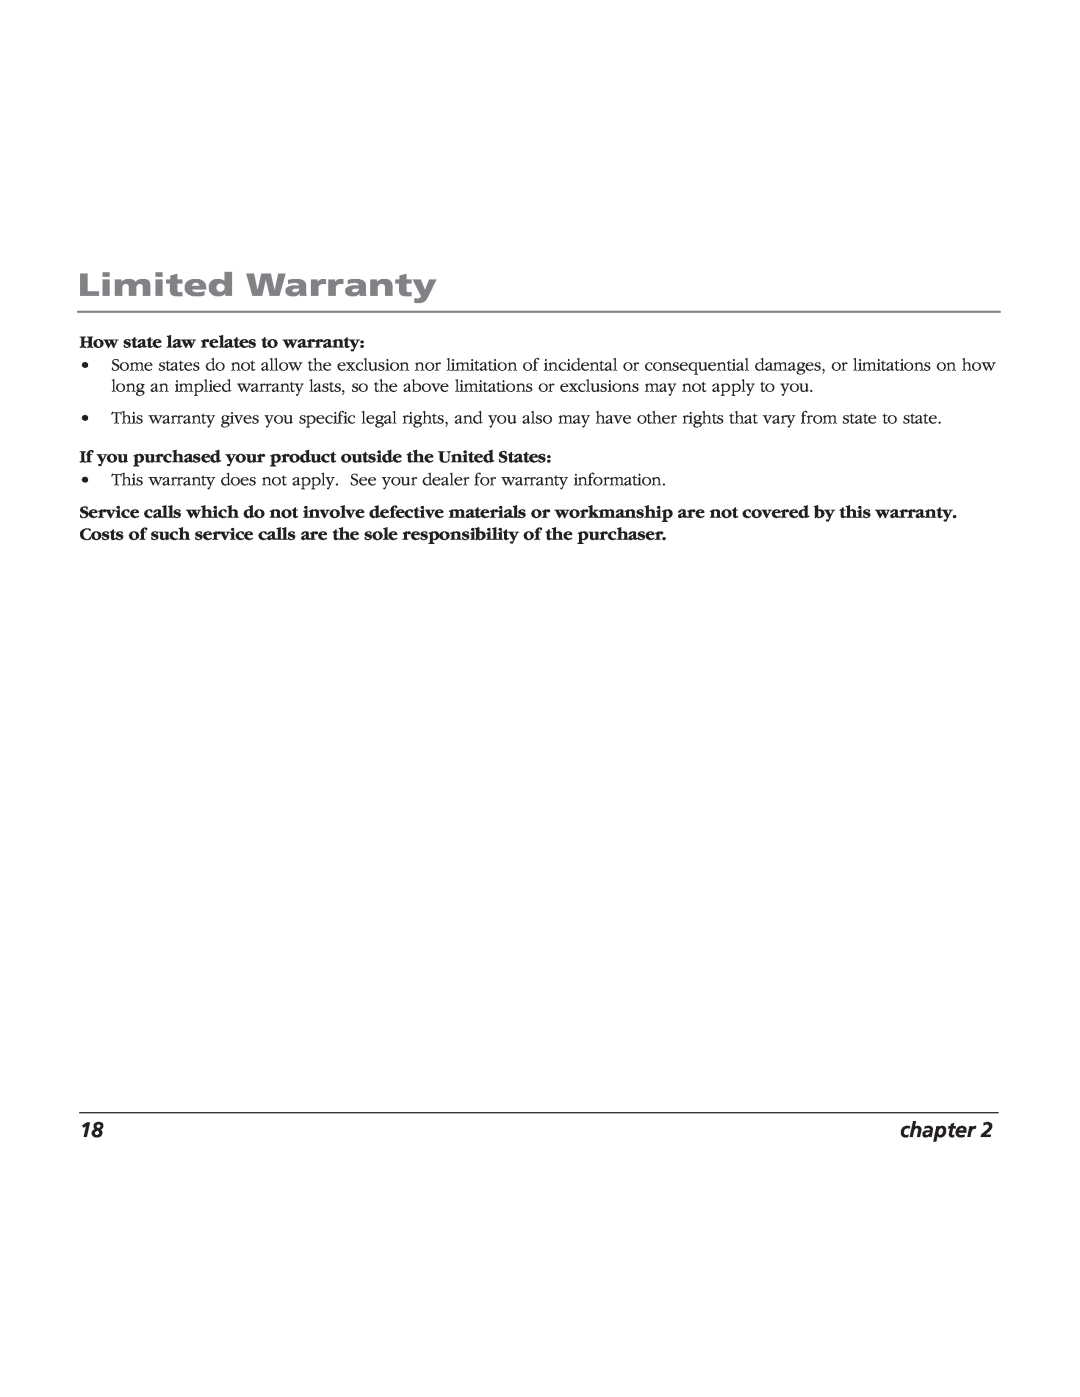 RCA TV/Radio/CD Player user manual Limited Warranty, chapter 